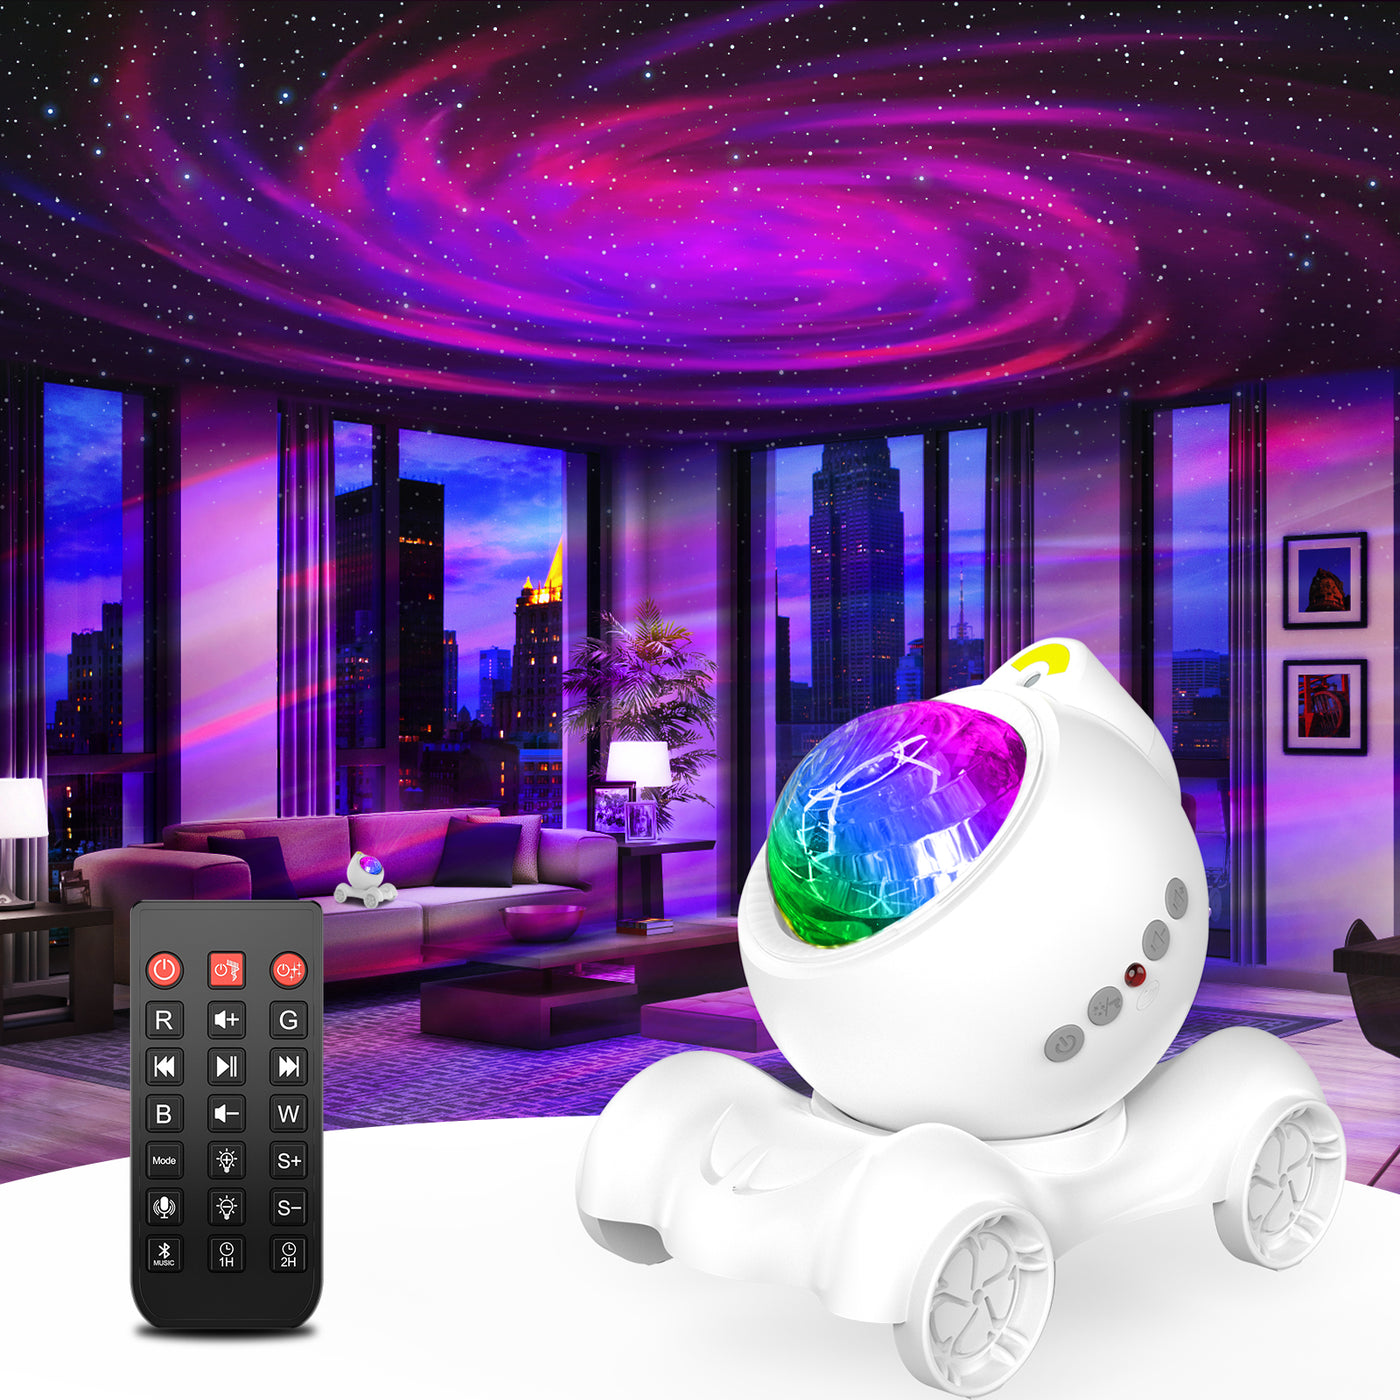 Galaxy Projector, Rossetta Star Lights for Bedroom with Remote Control, Bluetooth Speaker and White Noise, Night Light Projector for Kids Adults Gaming Room, Party, Home Theater, Ceiling, Room Decor